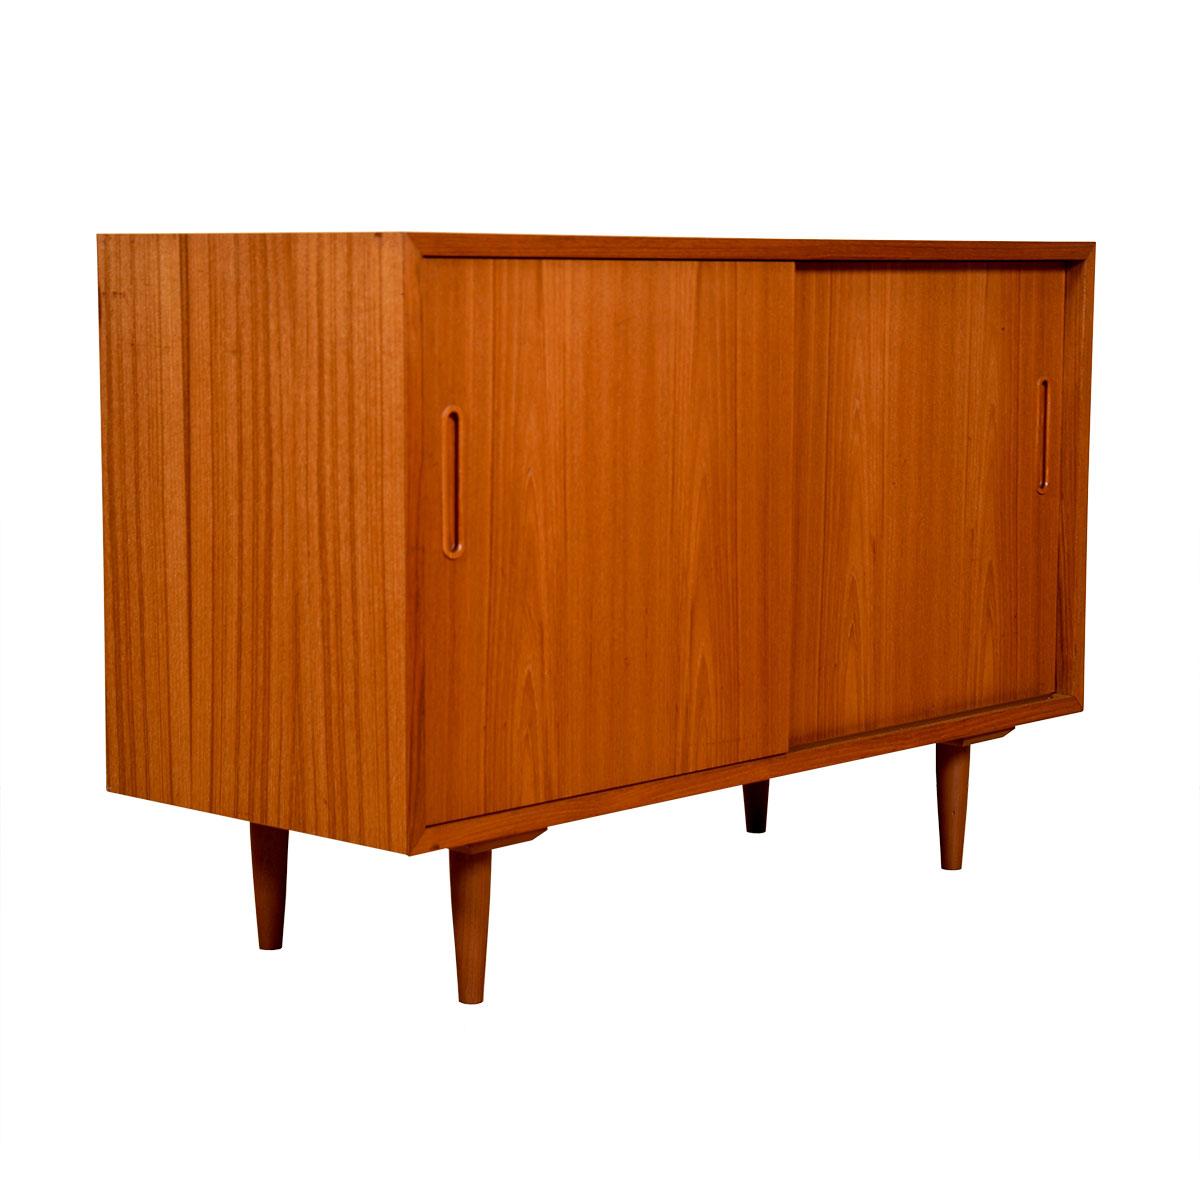 This compact Danish Modern credenza / sideboard with adjustable shelves and one felt-lined drawer is the perfect candidate to house your media components. The handles are vertically-carved ovals with a small frame around. The piece has two